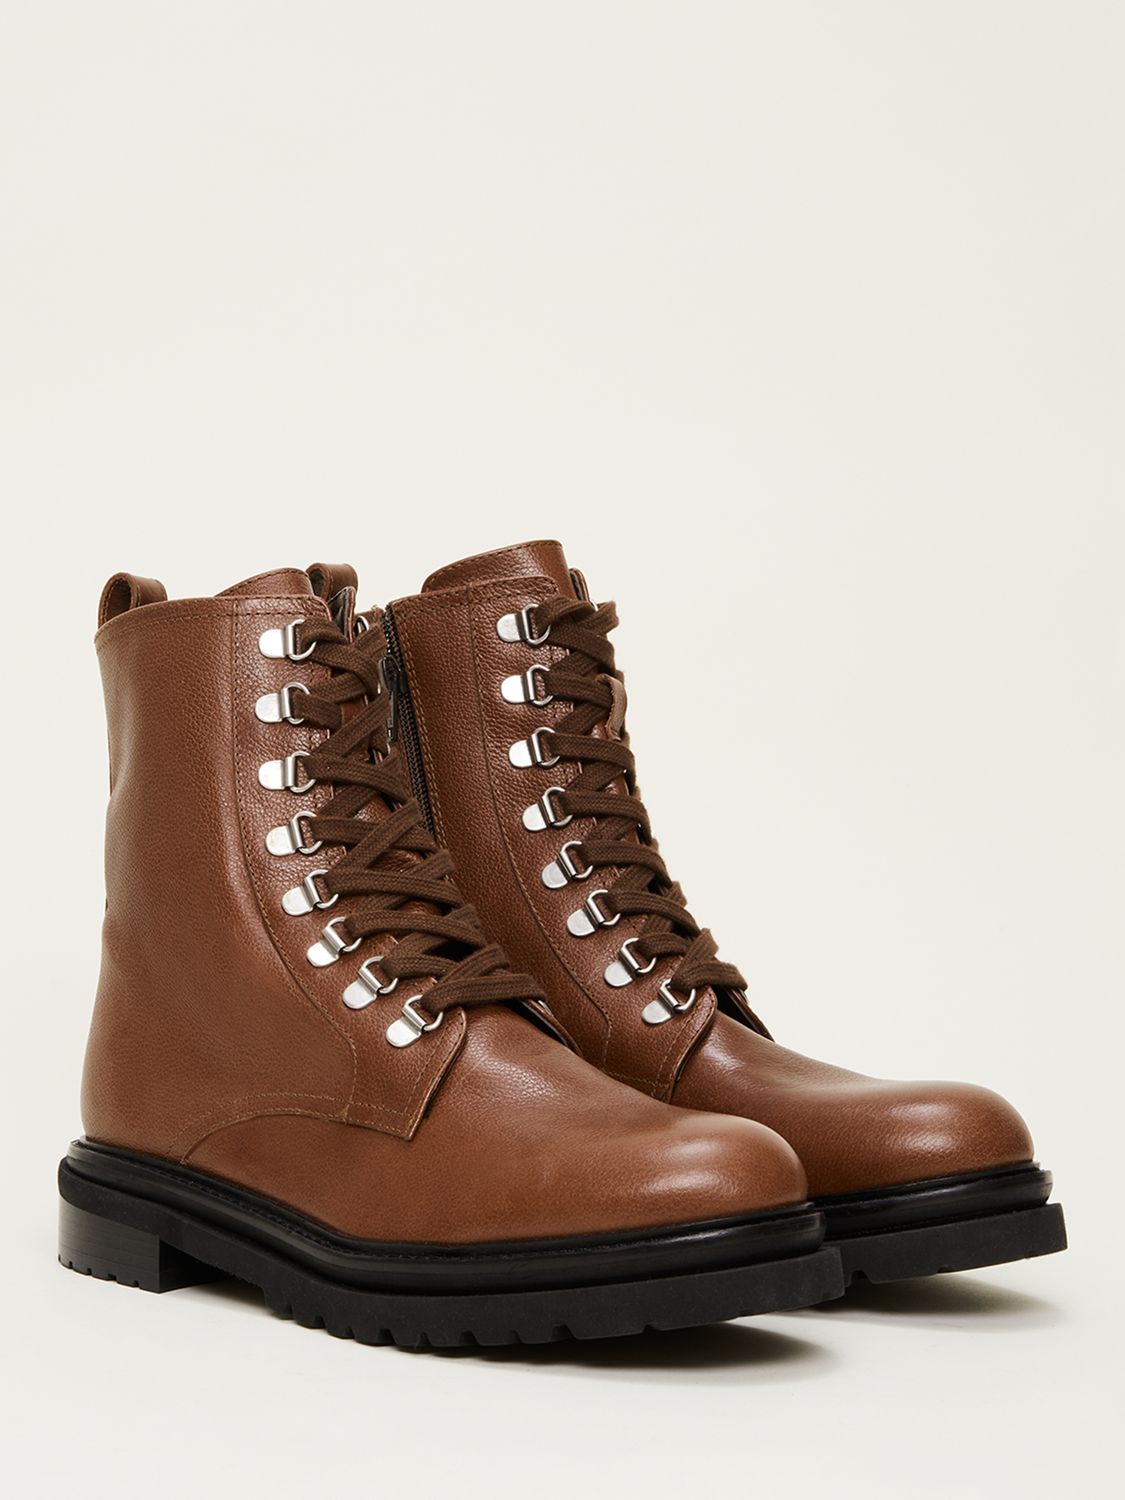 Phase Eight Meladie Leather Biker Boots, Brown at John Lewis & Partners